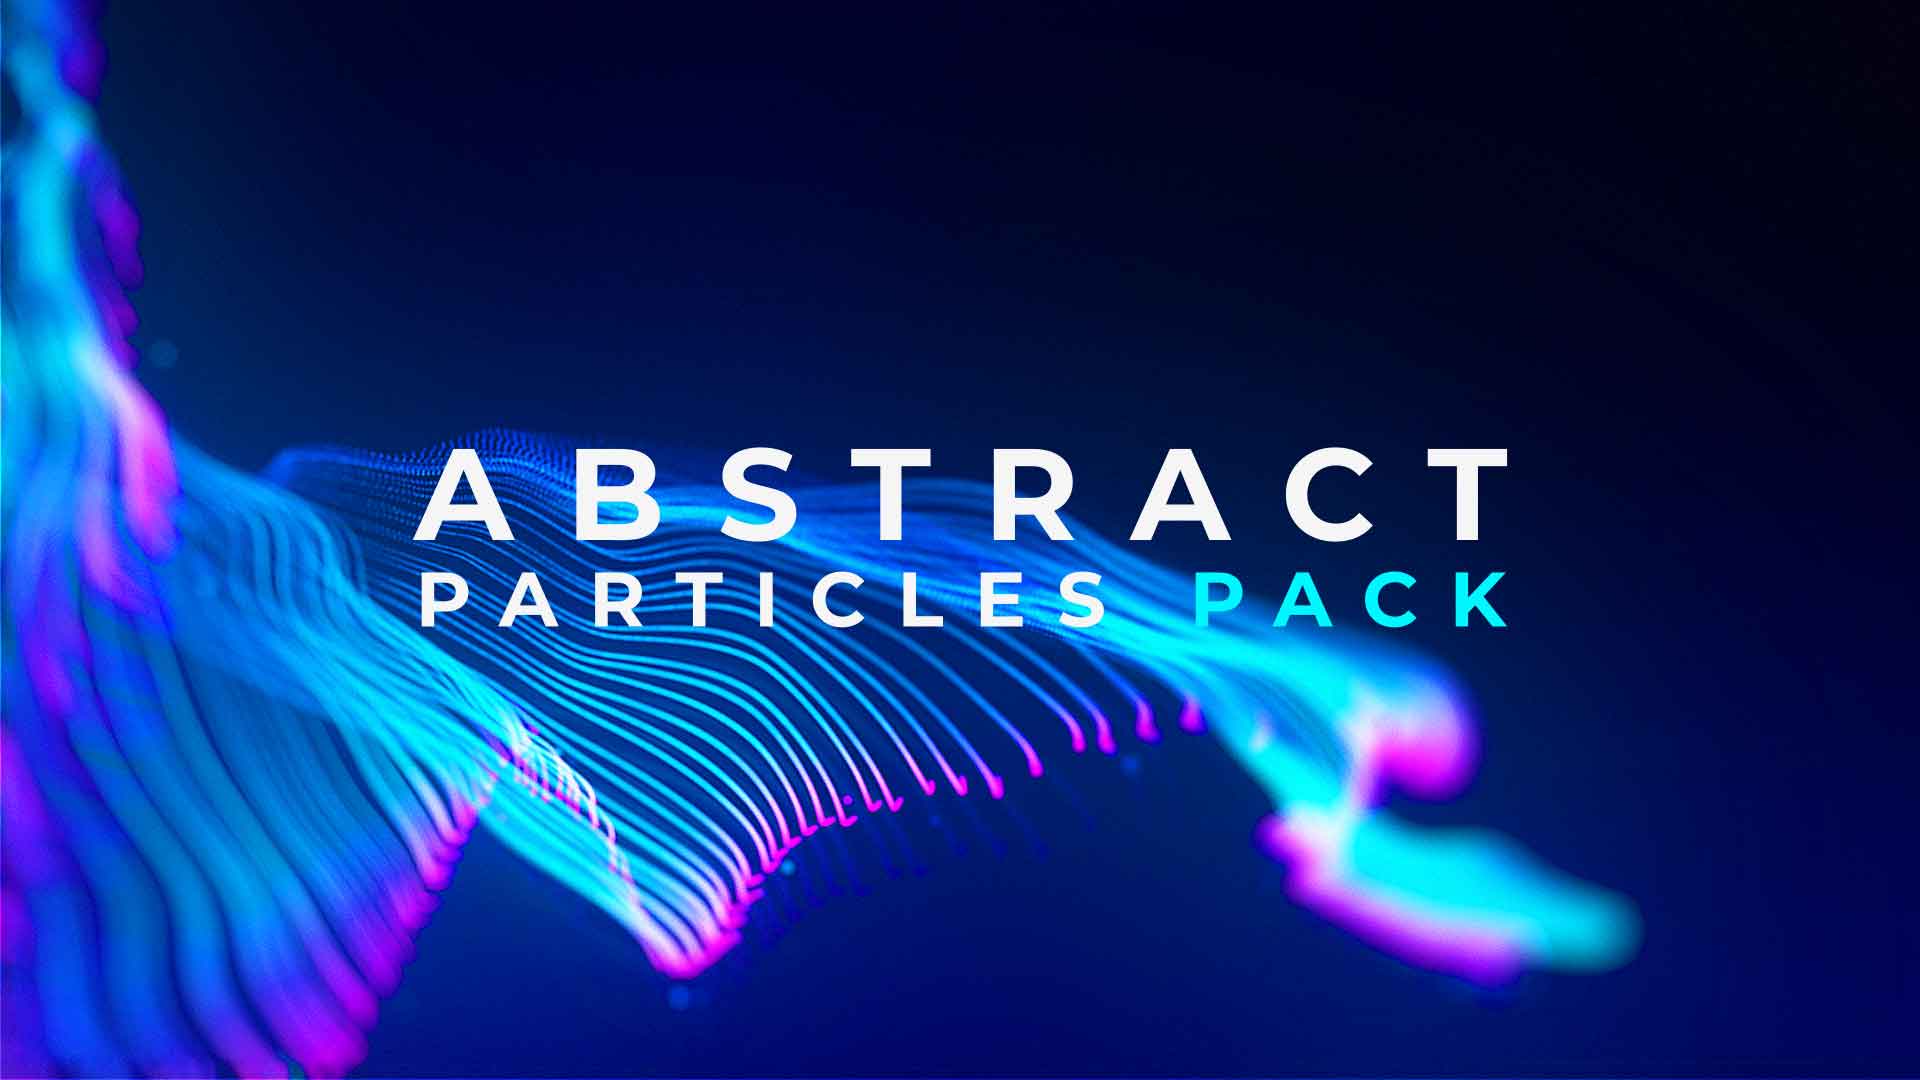 Abstract Particles Pack